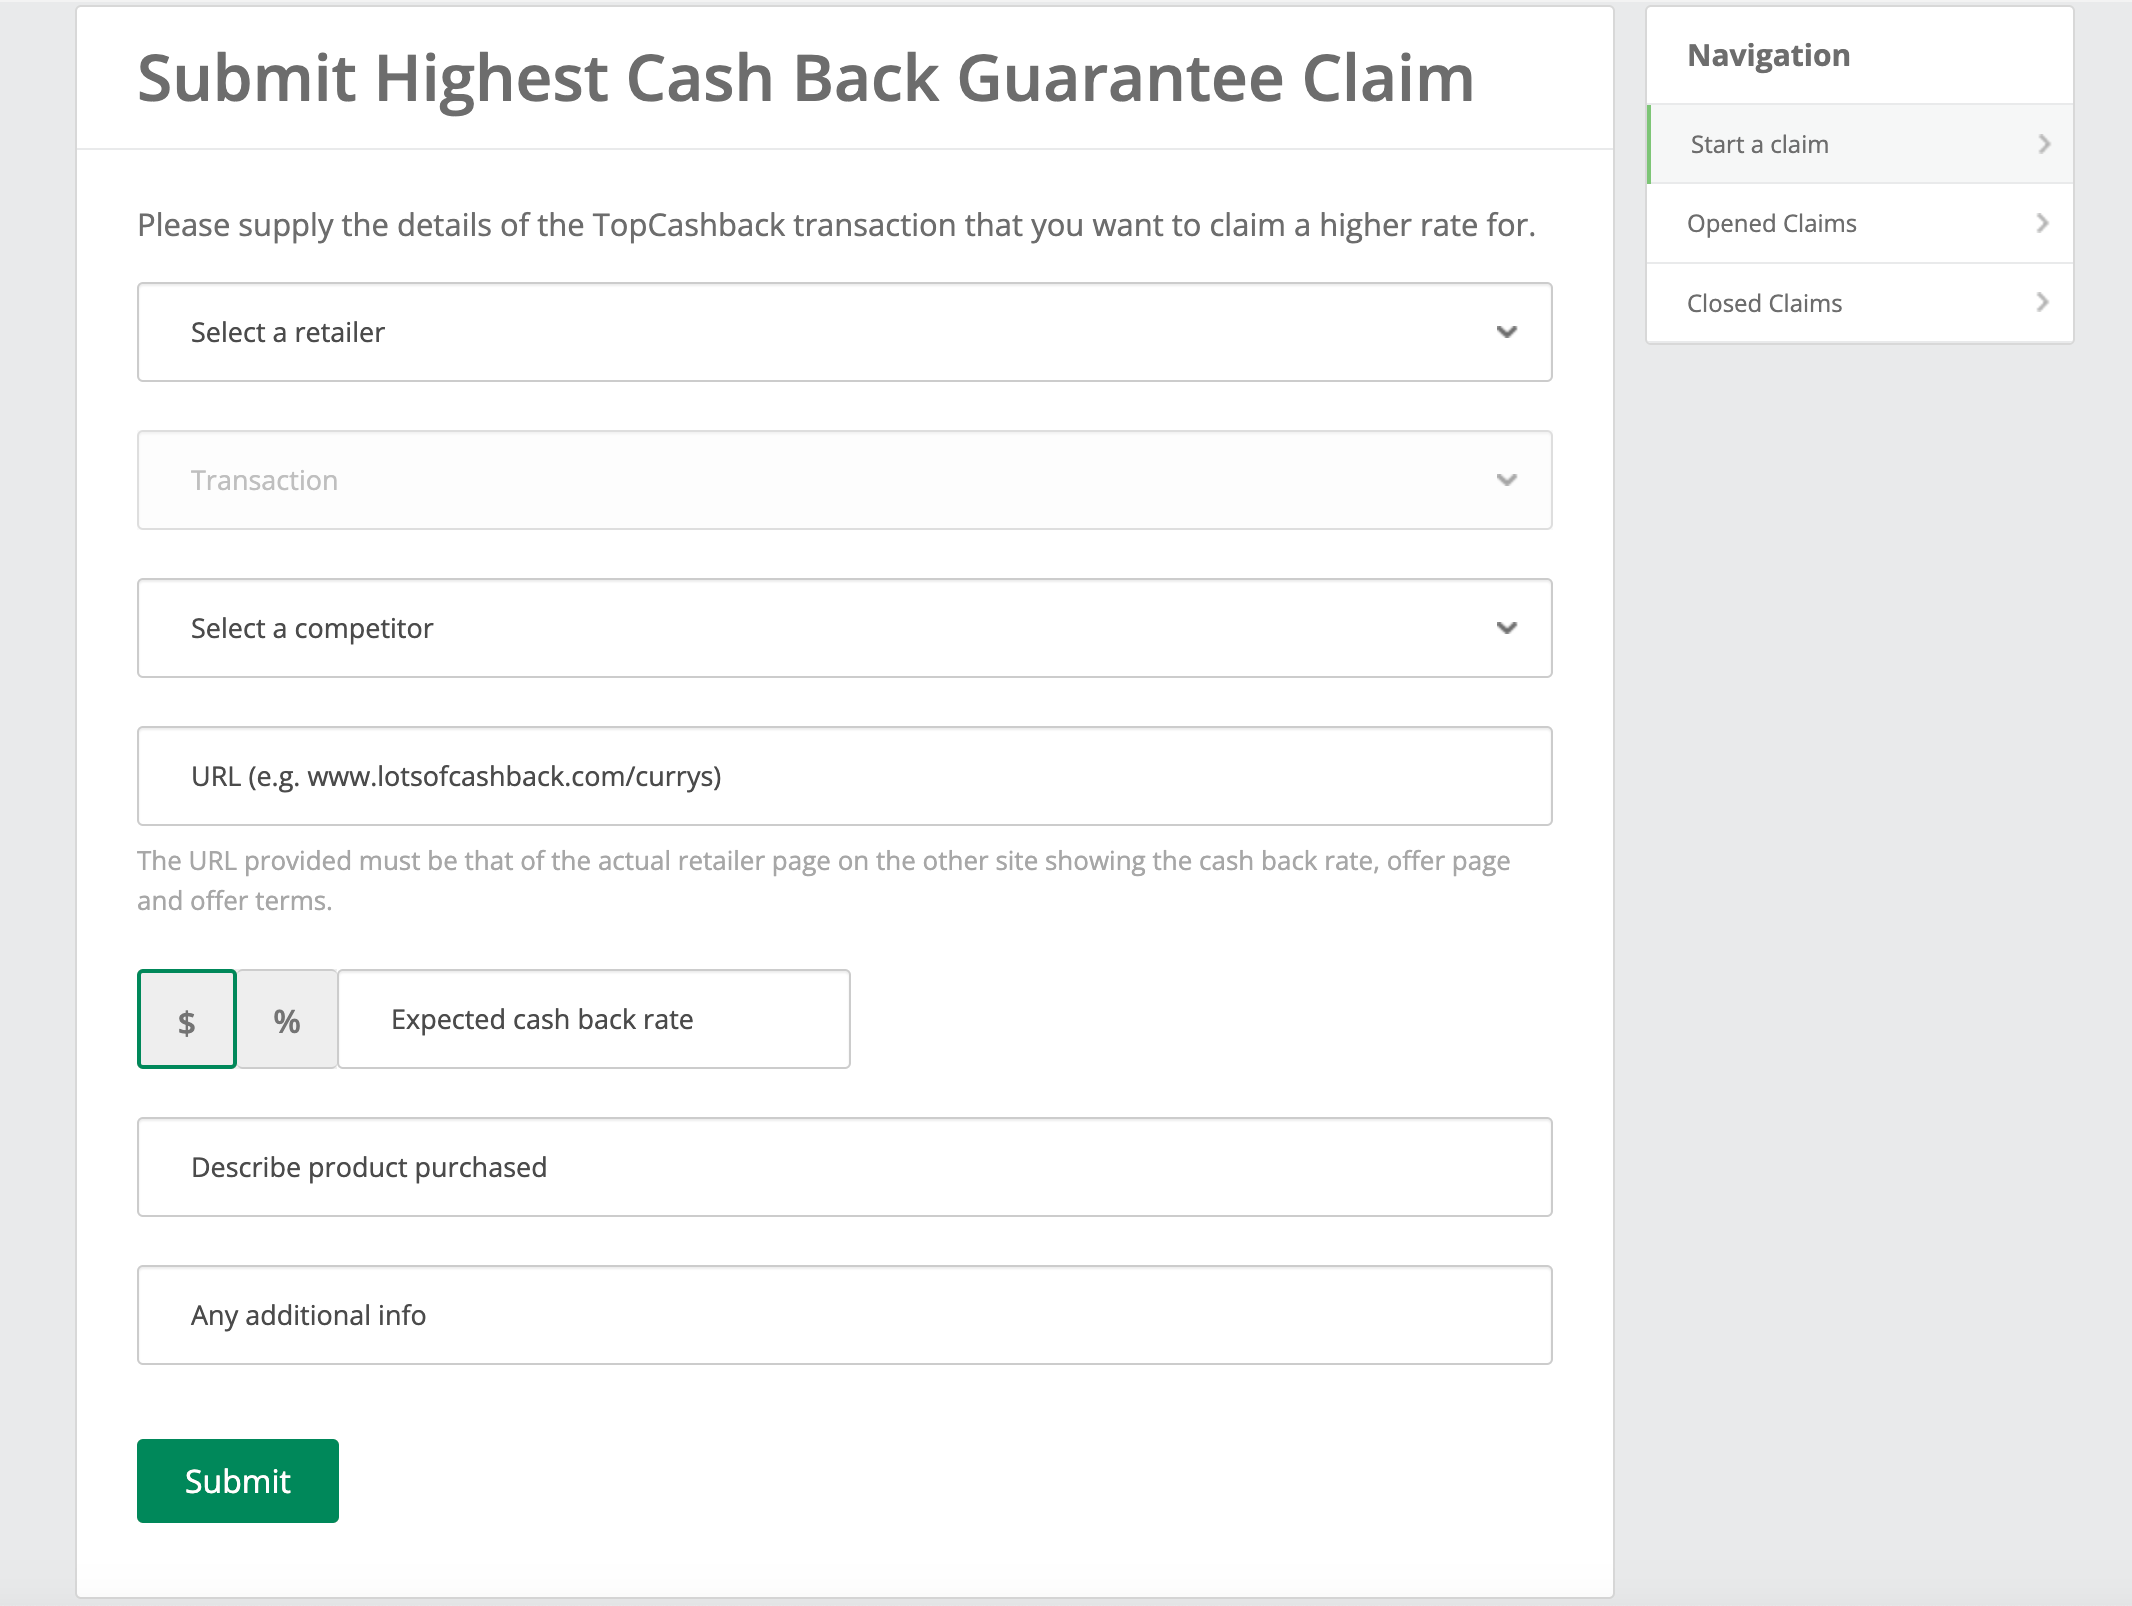 The submission page for Topcashback's highest cash-back guarantee